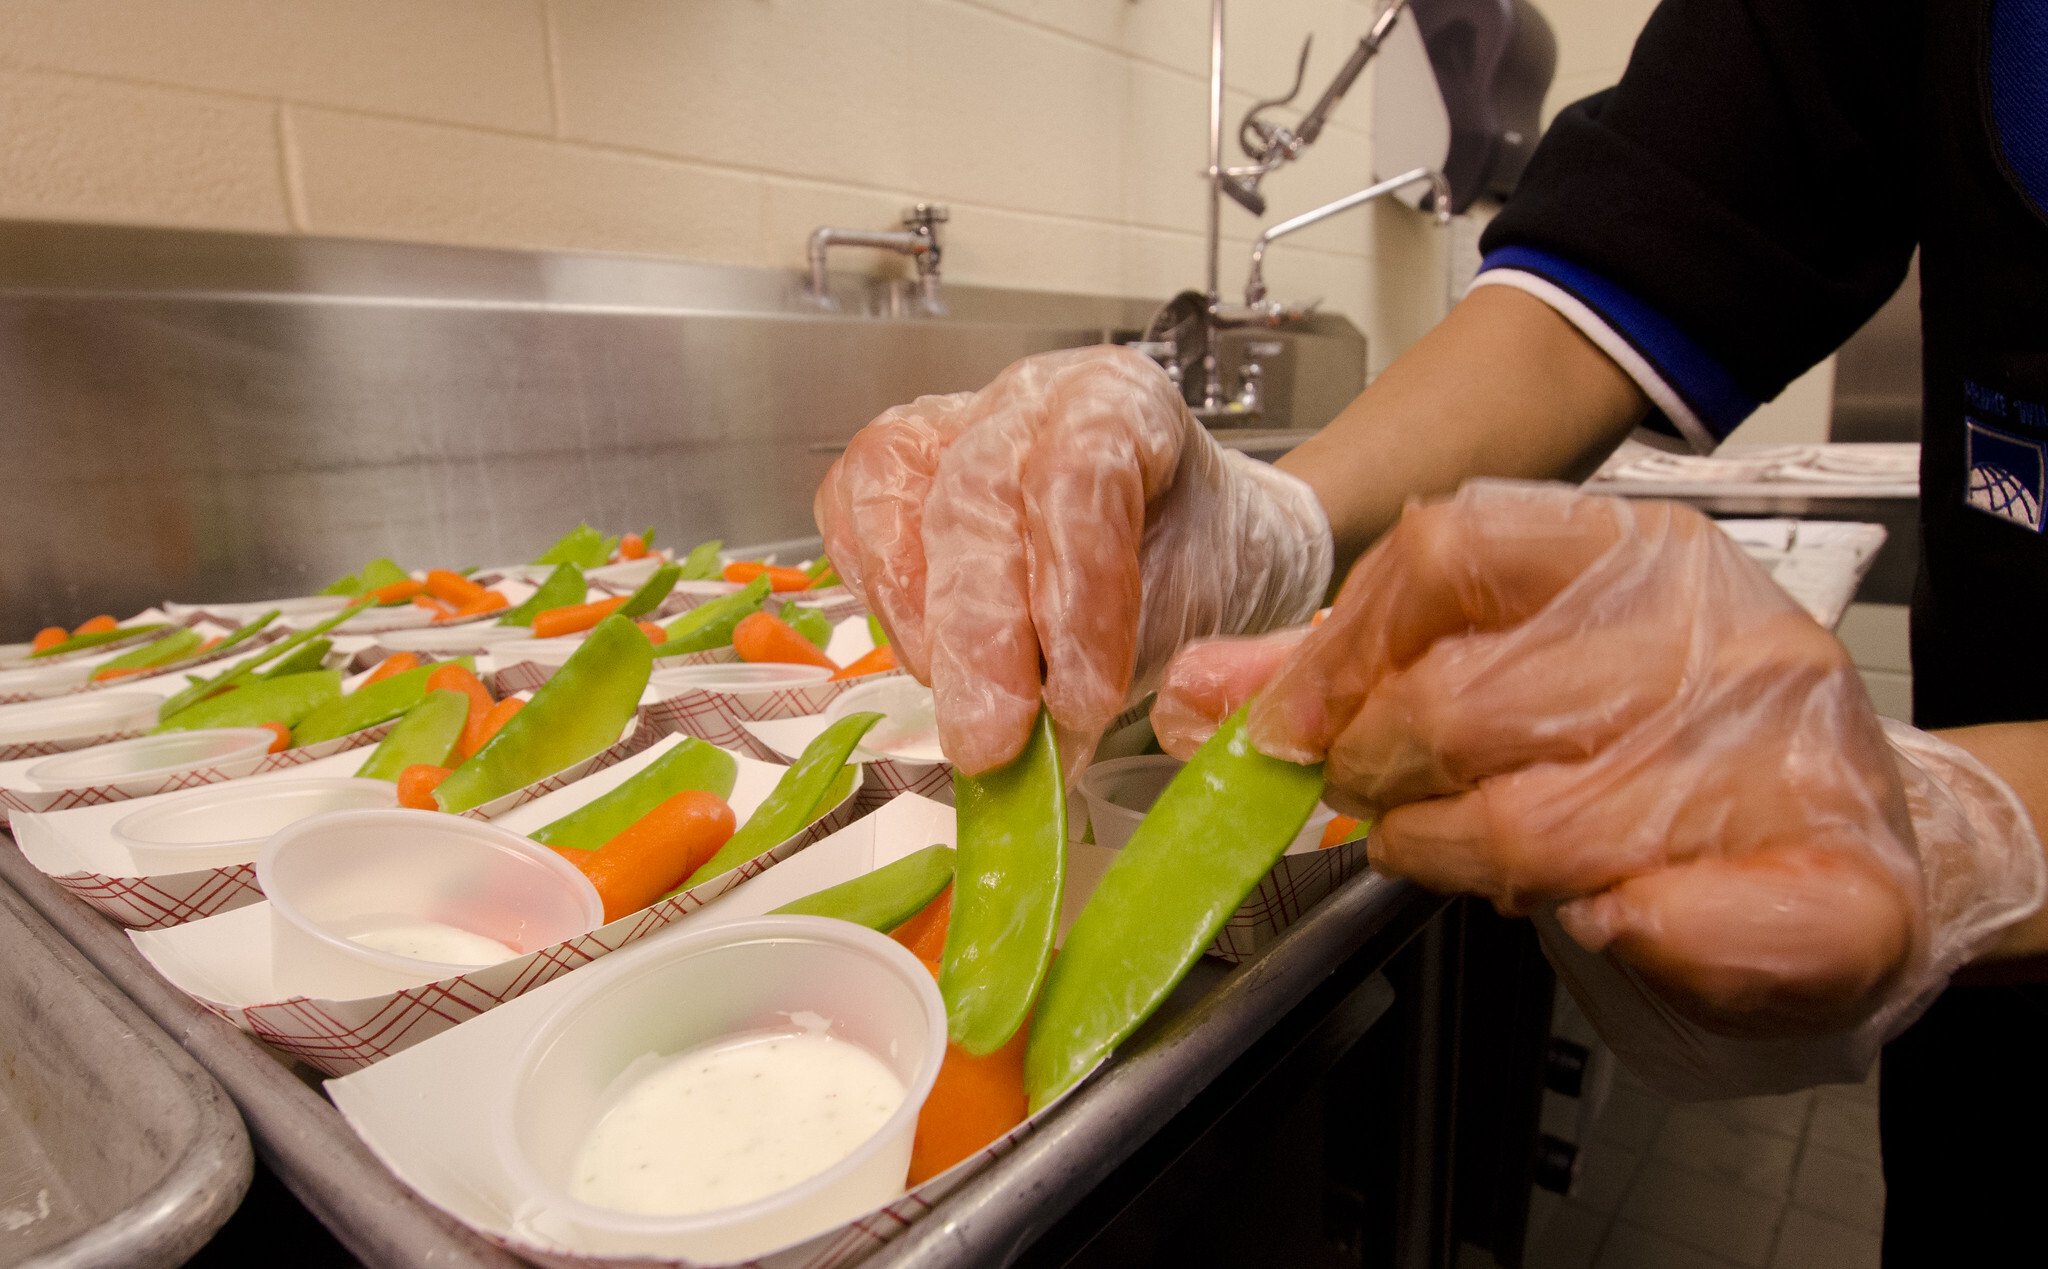 Two hands place snow peas on a school lunch tray with carrots and ranch dressing on the side. (April 2020)